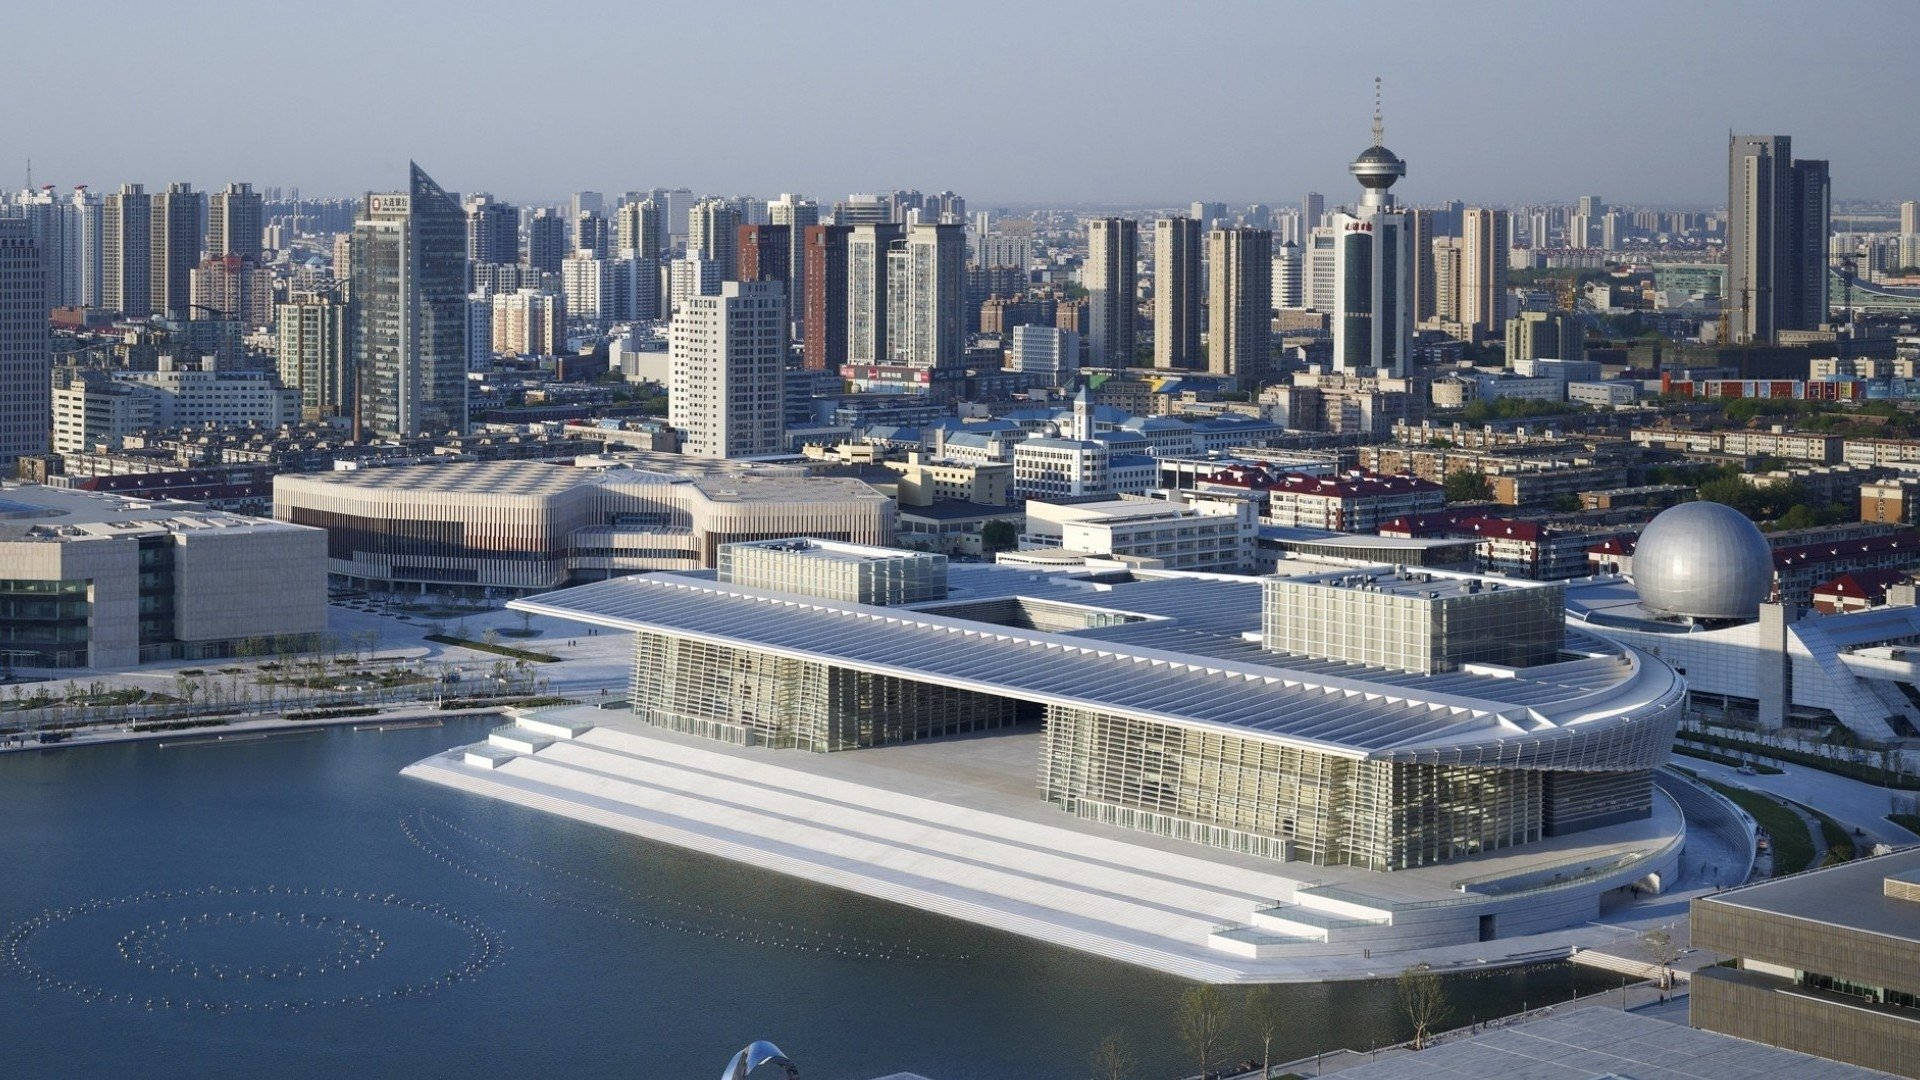 Tianjinnational Convention Center In German Can Be Translated As 